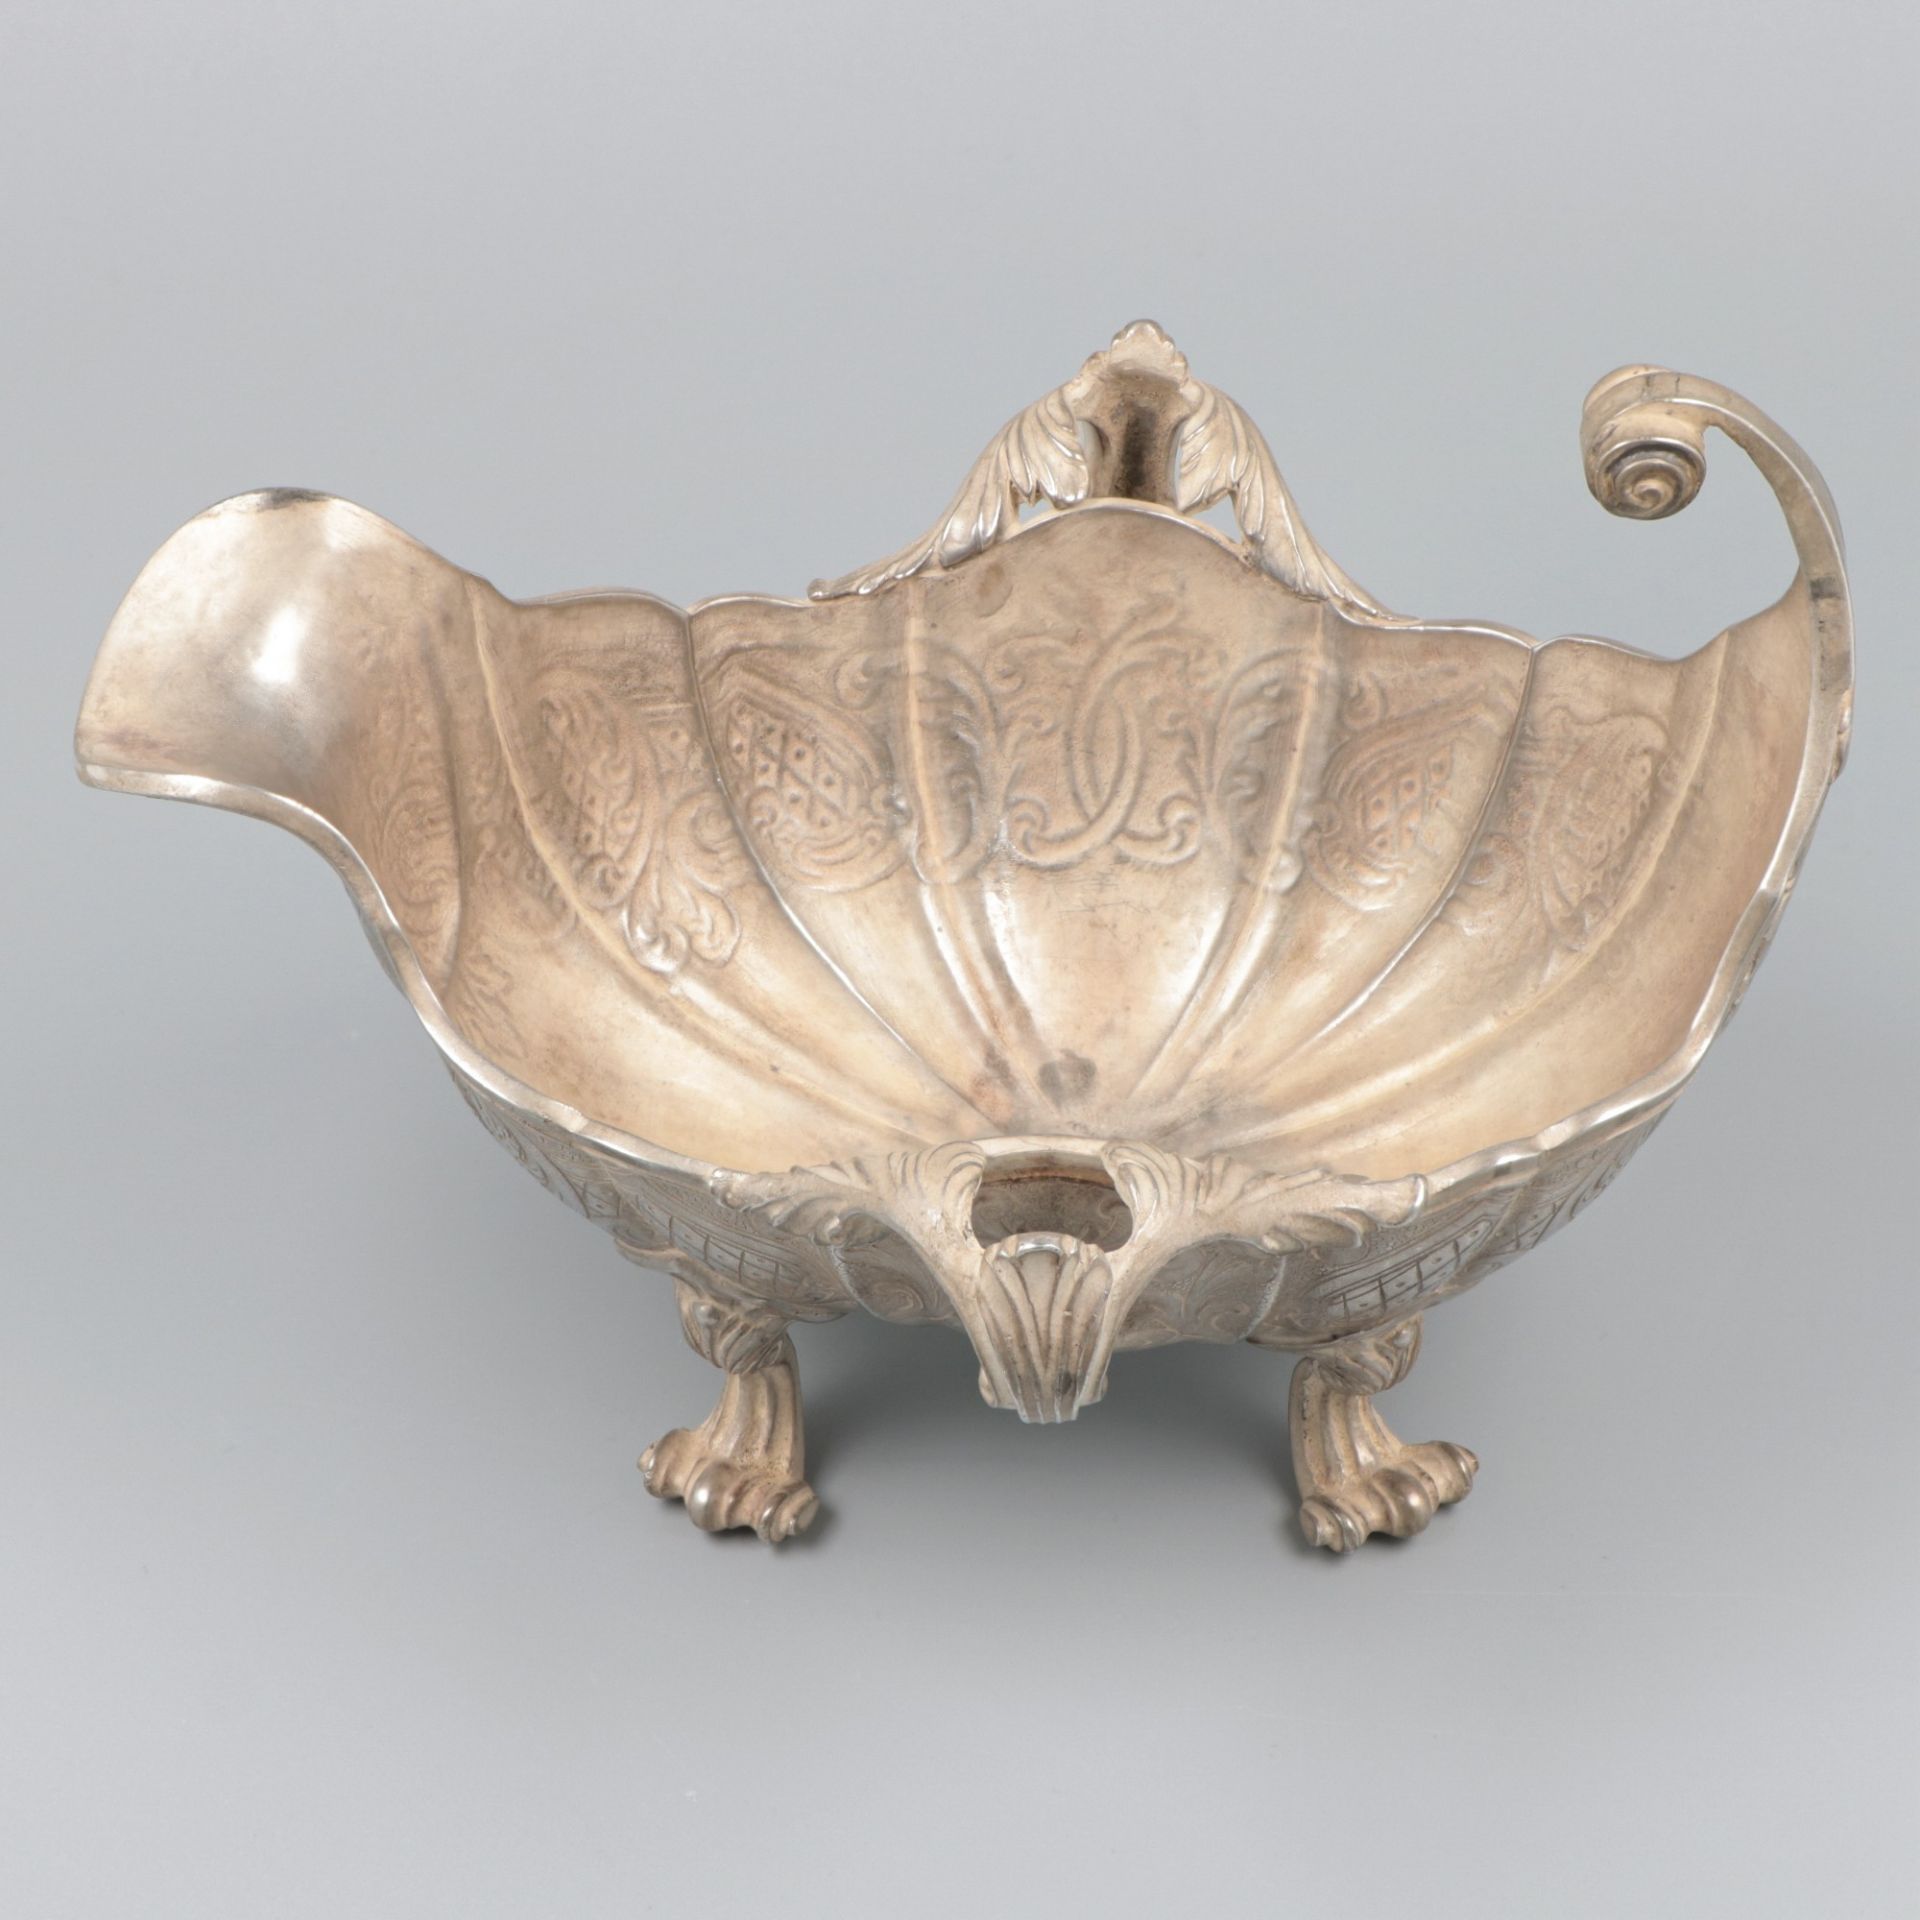 Saucière / sauce boat silver. - Image 8 of 9